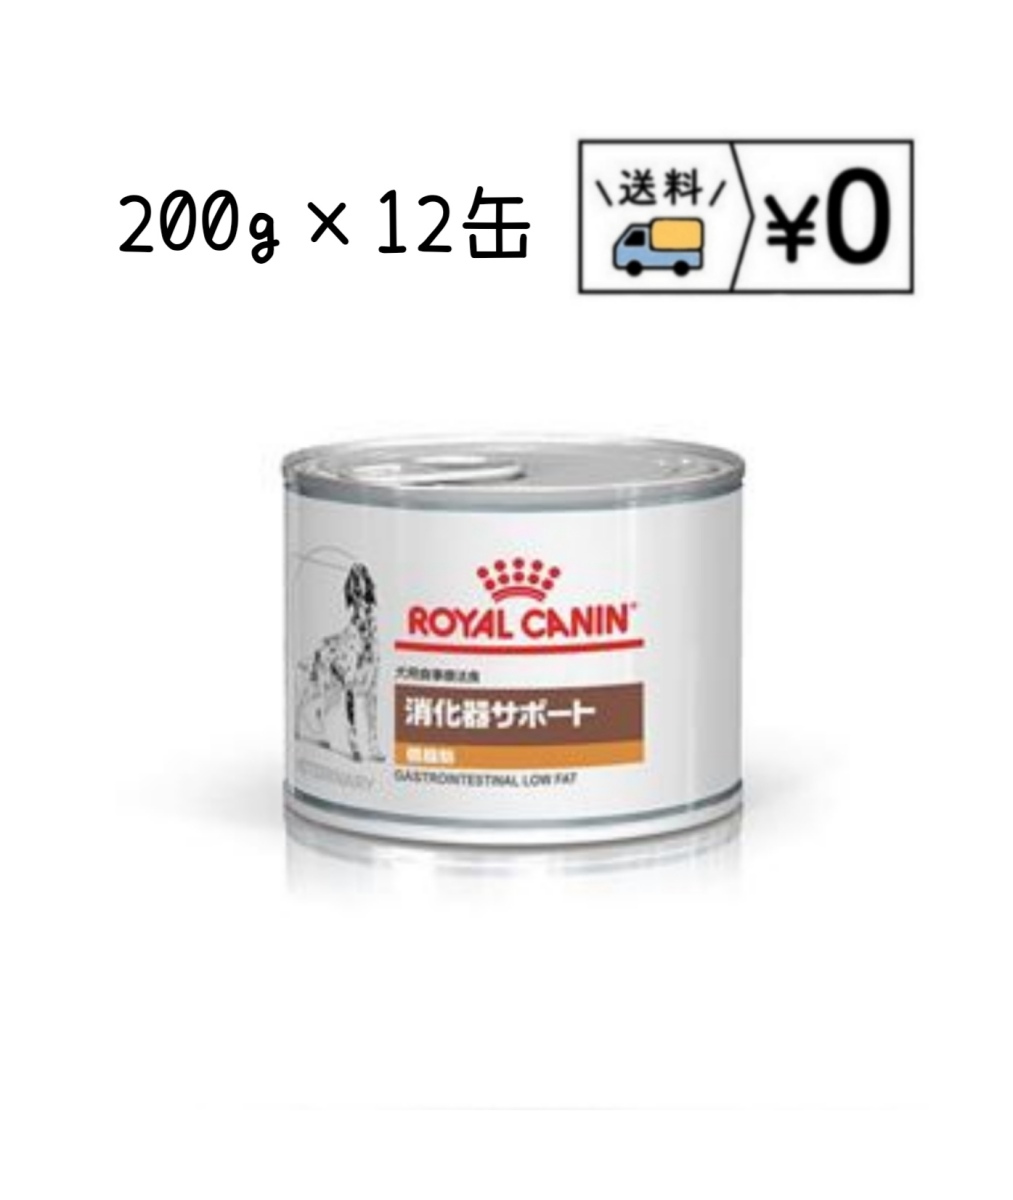  Royal kana n dietary cure meal dog for .. vessel support low fat . can ( low f) 200g×12 can free shipping 